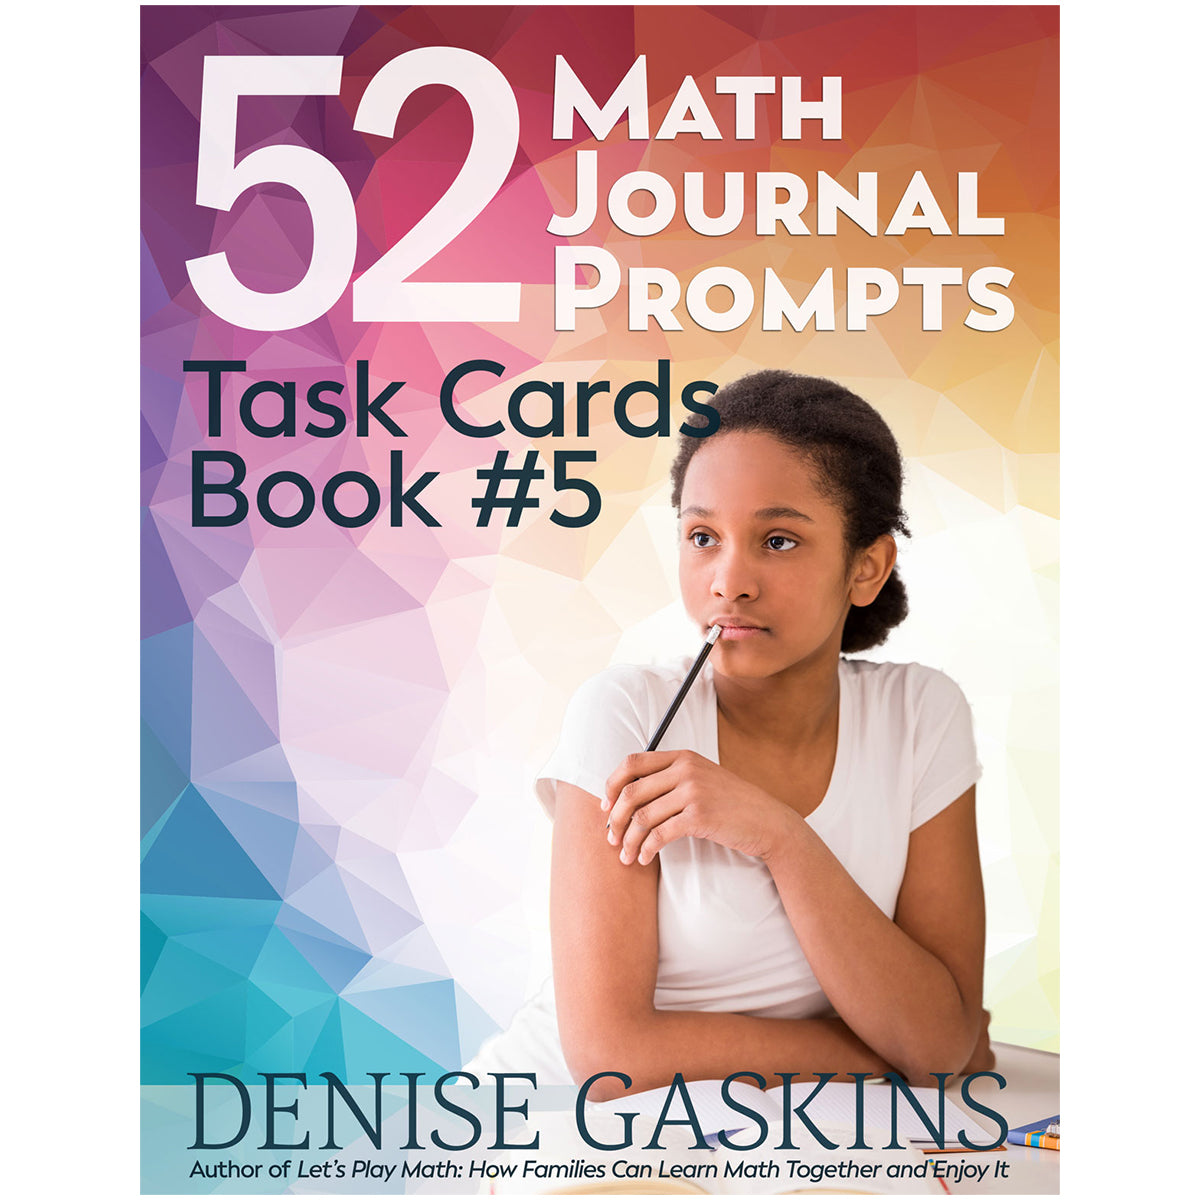 Math Journal Prompts book five printable math activity book by Denise Gaskins